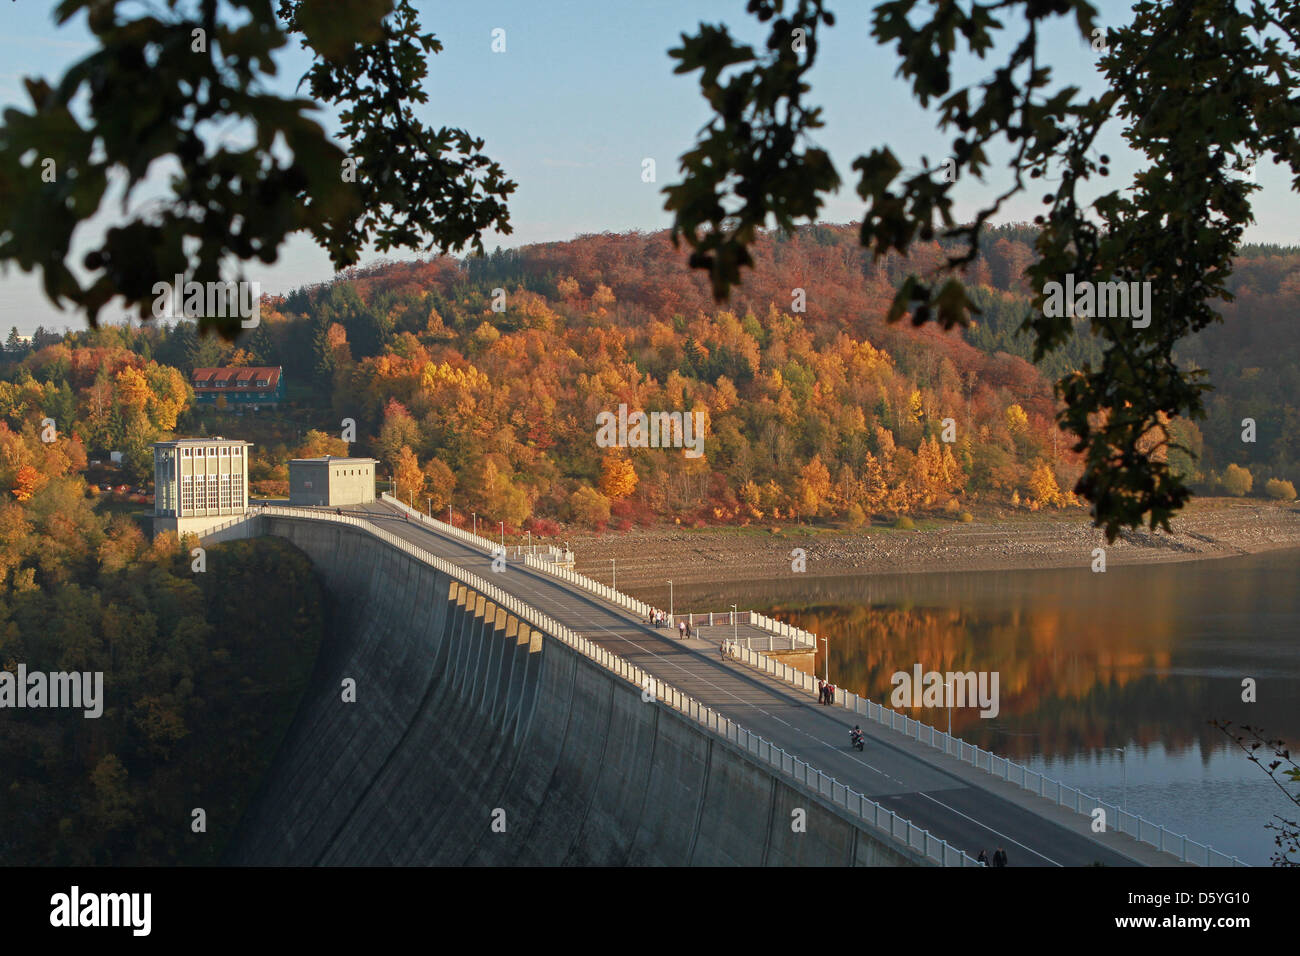 View of the dam of the Rappbodetal River Dam in Autumn near Hasselfelde, Germany, 24 October 2012. With a height of 106 metres the dam, which was built between 1952 and 1959, is the highest in Germany. Photo: Matthias Bein Stock Photo